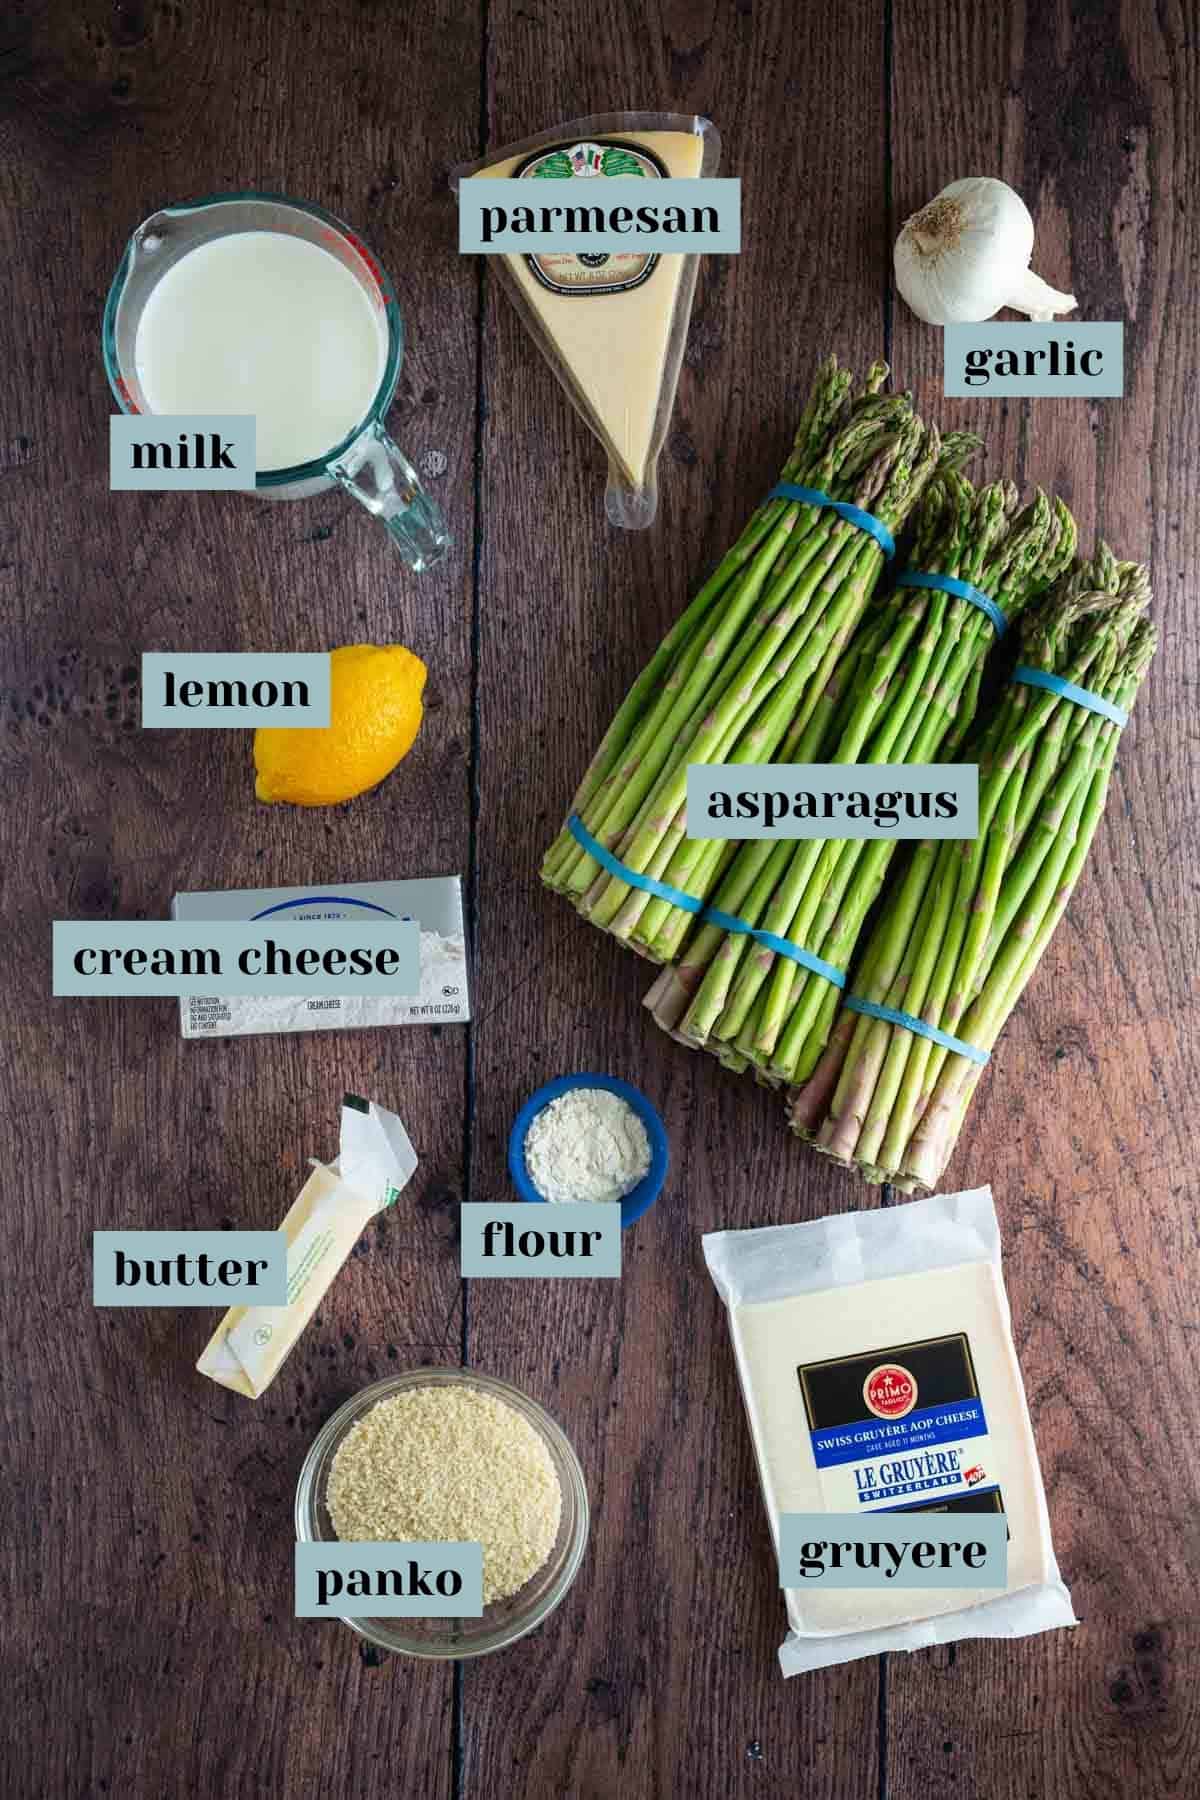 Ingredients for asparagus gratin recipe laid out on a wooden surface.